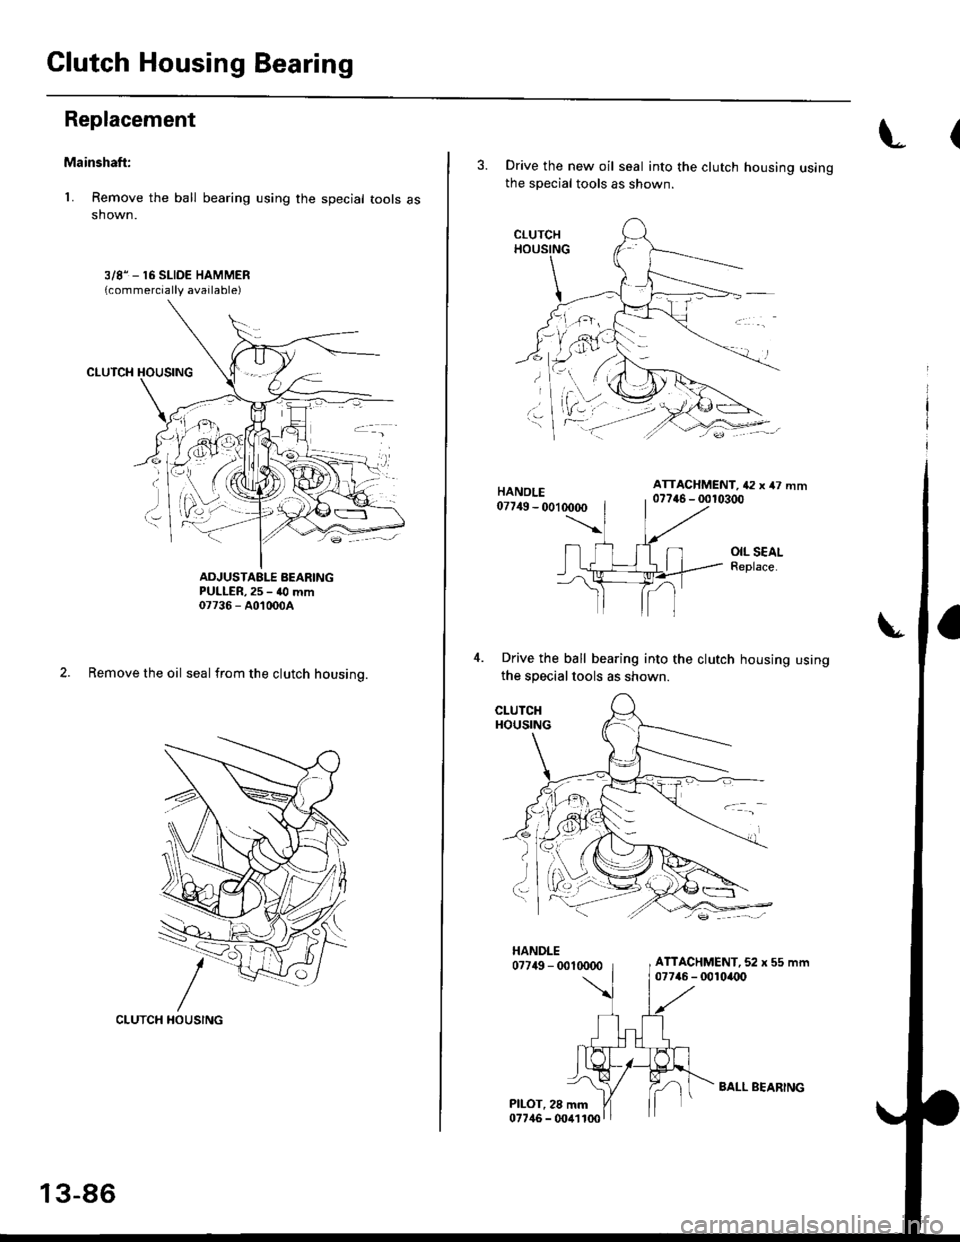 HONDA CIVIC 1996 6.G Repair Manual Clutch Housing Bearing
Replacement
Mainshaft:
L Remove the ball bearing using the special tools asshown.
3/81_ 16 SLIDE HAMMER{commercially available)
ADJUSTAELE BEARINGPULLER, 25 - 40 mm07736 - A0100